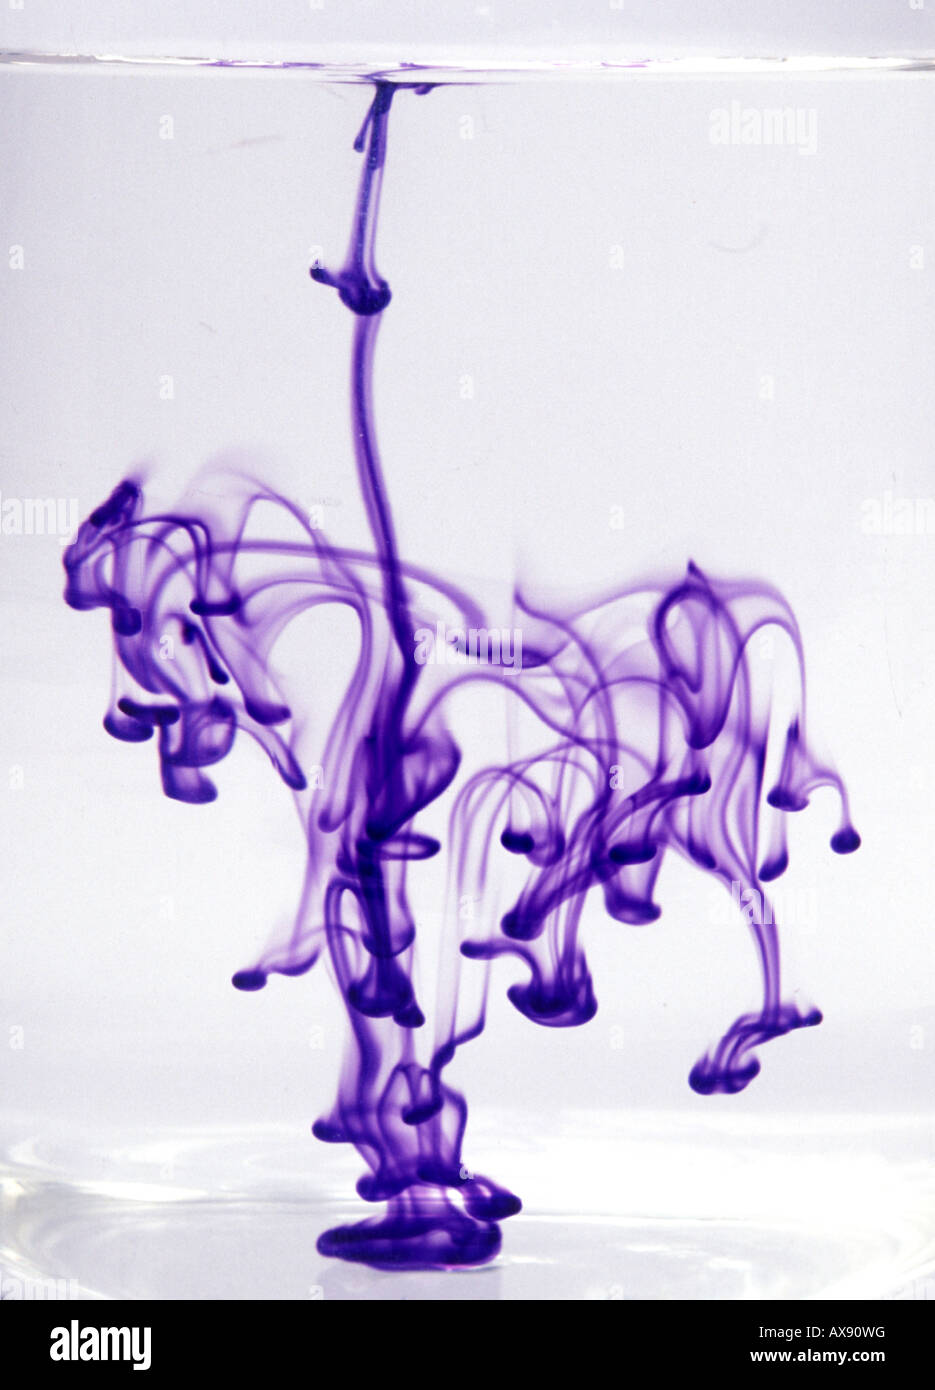 the pattern formed when a purple drop of water falls into a beaker of water Stock Photo